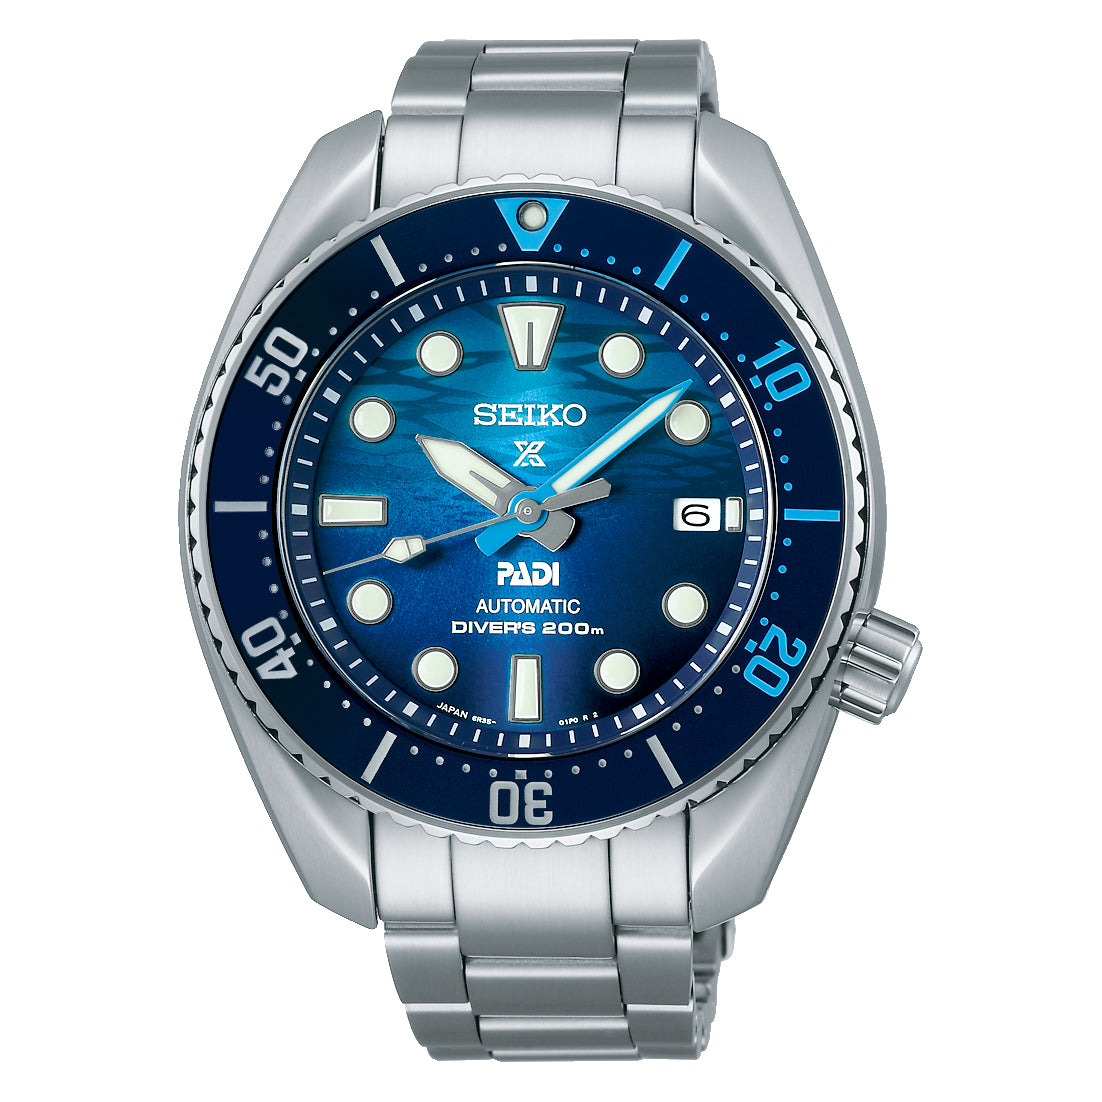 Seiko Prospex PADI Automatic Diver's "The Great Blue" Special Edition Watch SPB375J1